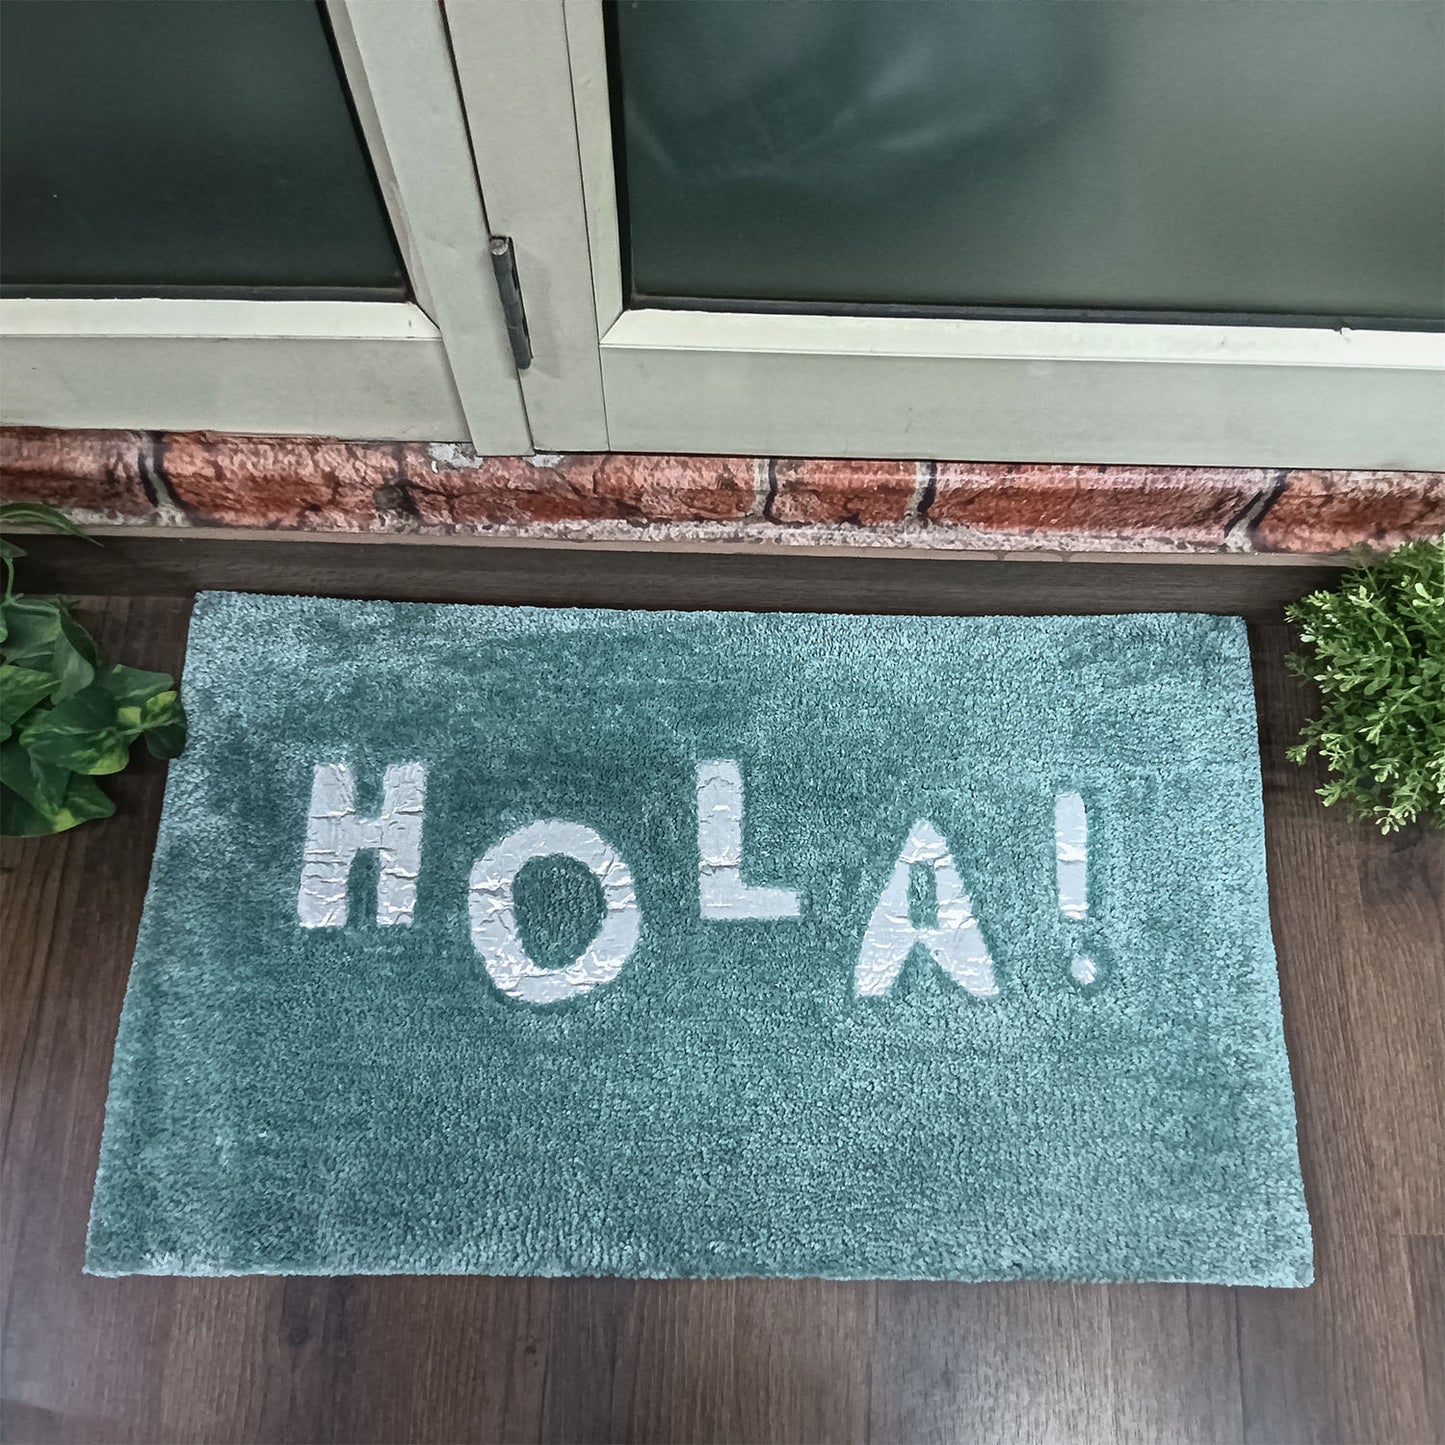 Avioni Divine Collection | Luxury Golden Touch Tufted Rug In "HOLA" (Spanish Greeting) Soft And Plush Handmade Door Mats | Pooja Mats | BathMats | Different Sizes